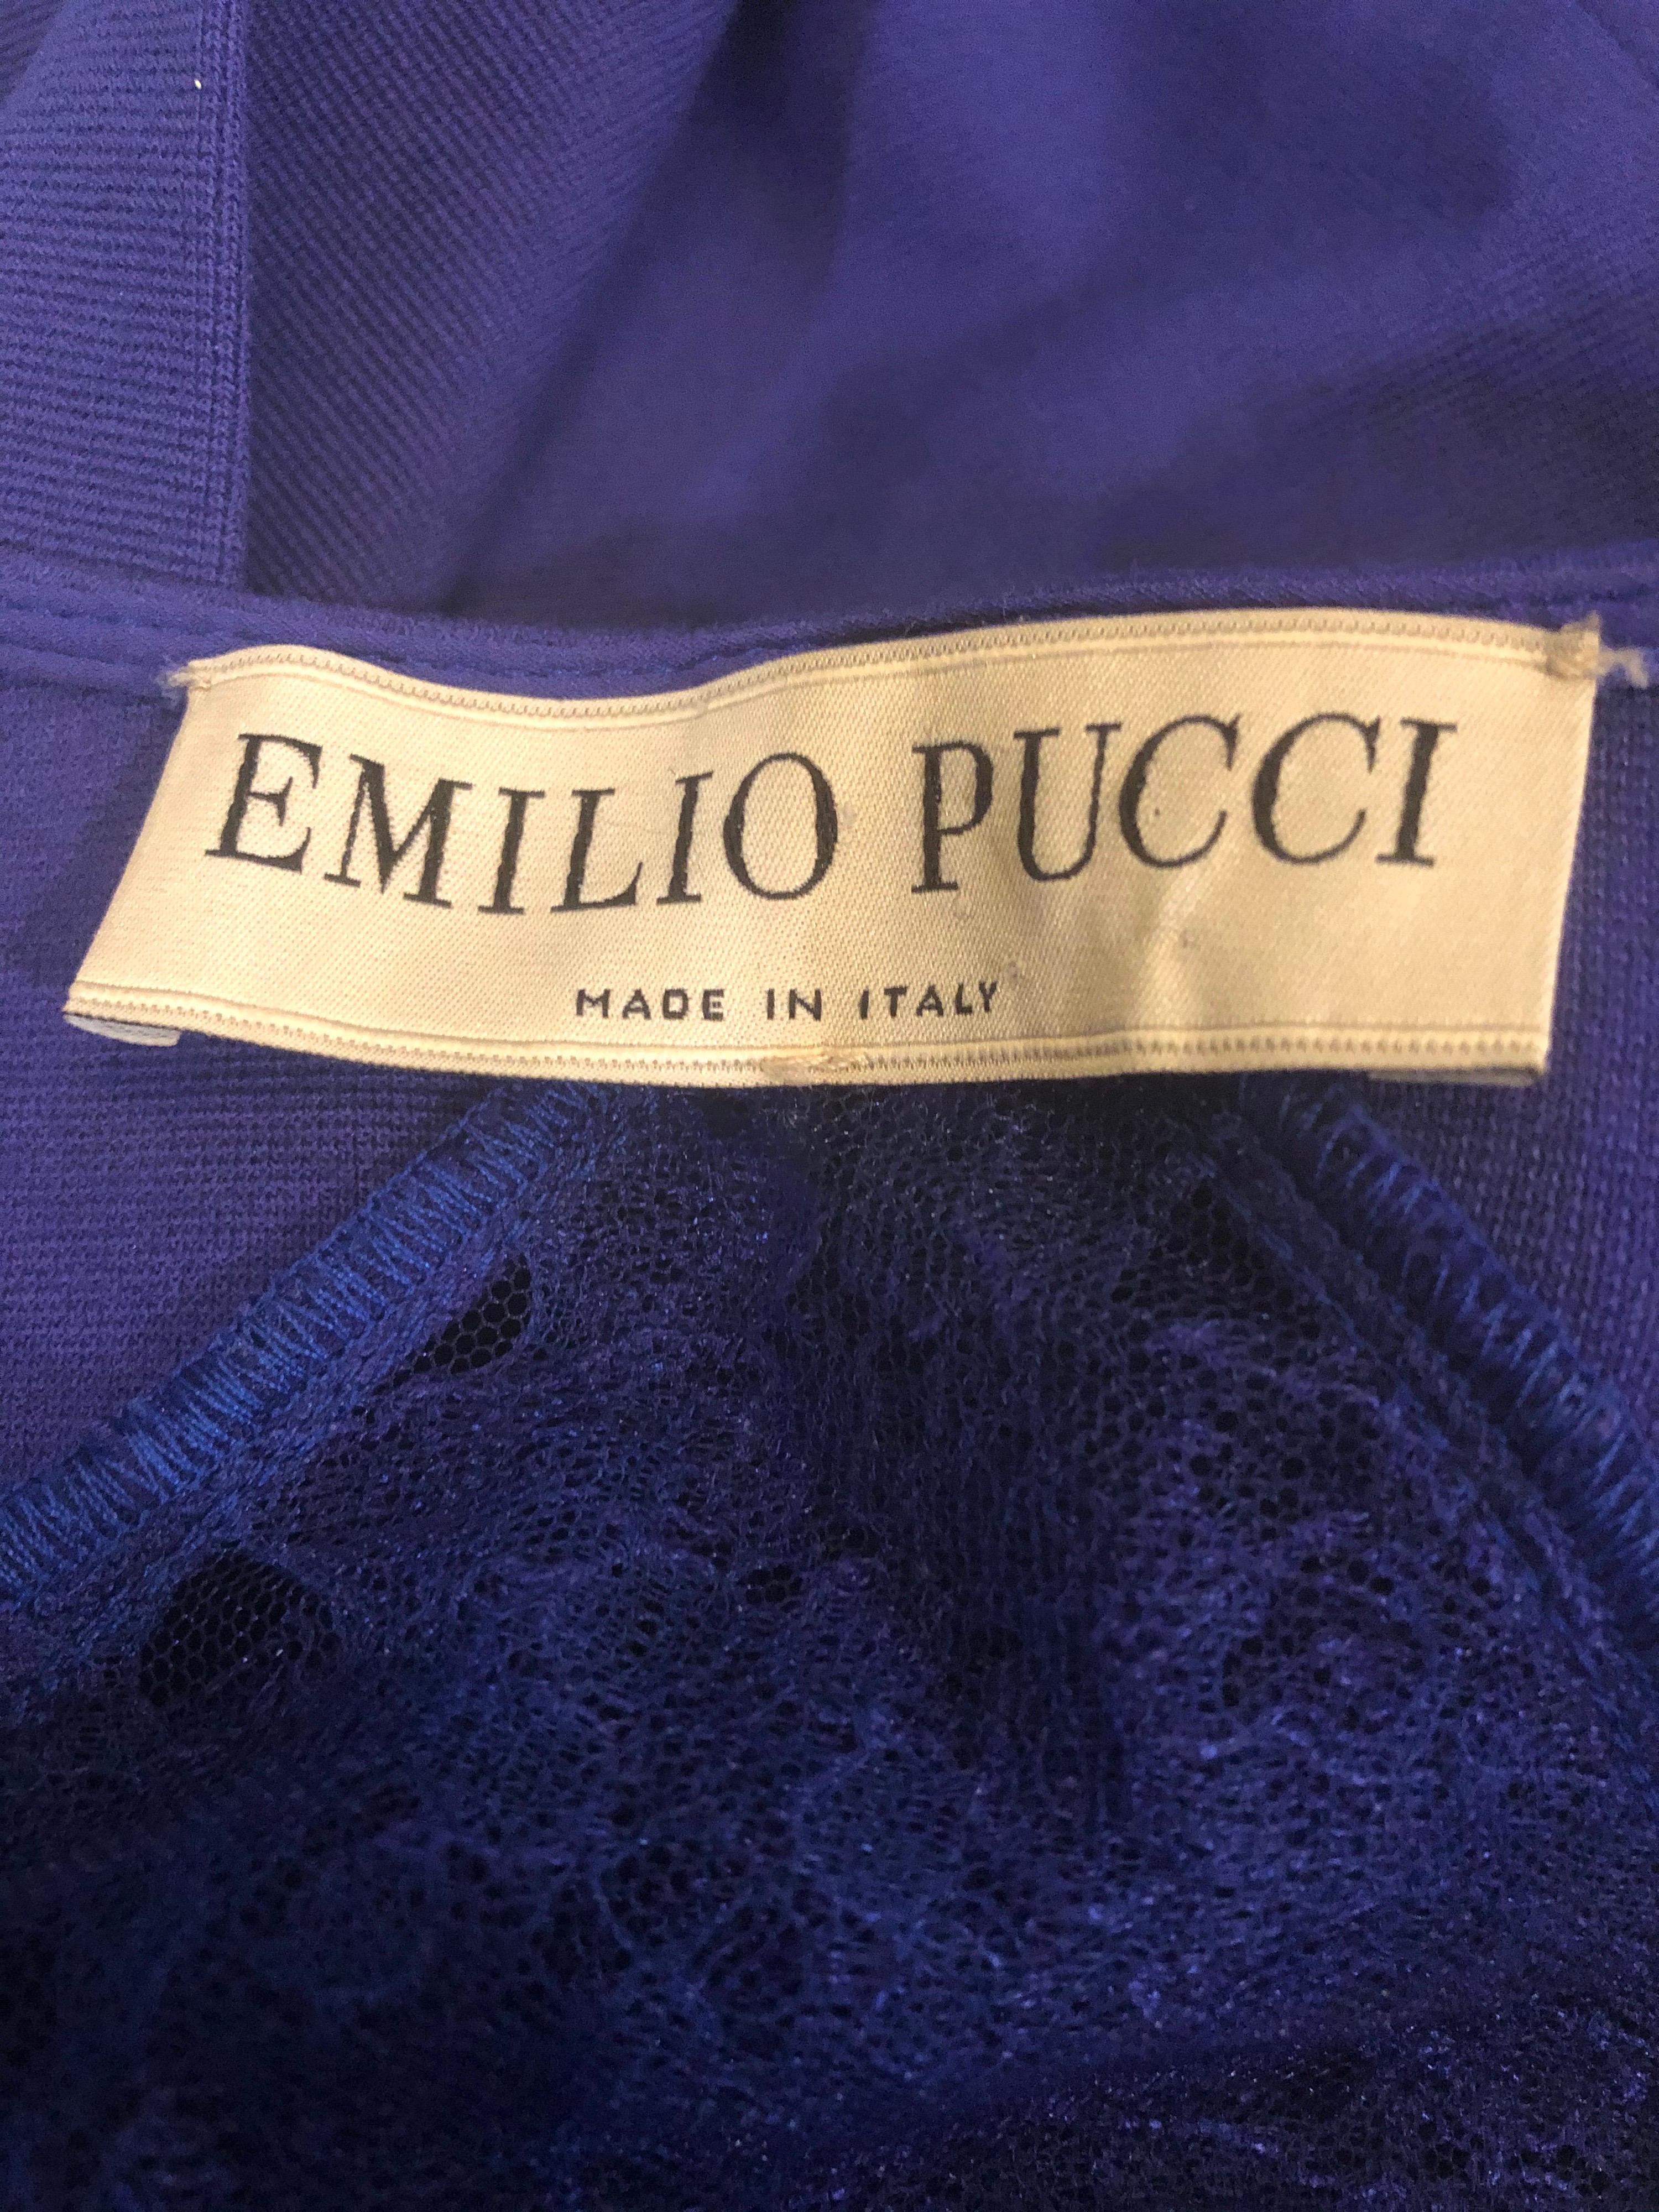 Sexy EMILIO PUCCI Fall 2012 purple rayon jersey / lace cut-out dress ! Features a soft stretch rayon jersey with sheer lace cut-out panels at each side and on the back. This was the year Peter Dundas took Pucci into another direction. Known for